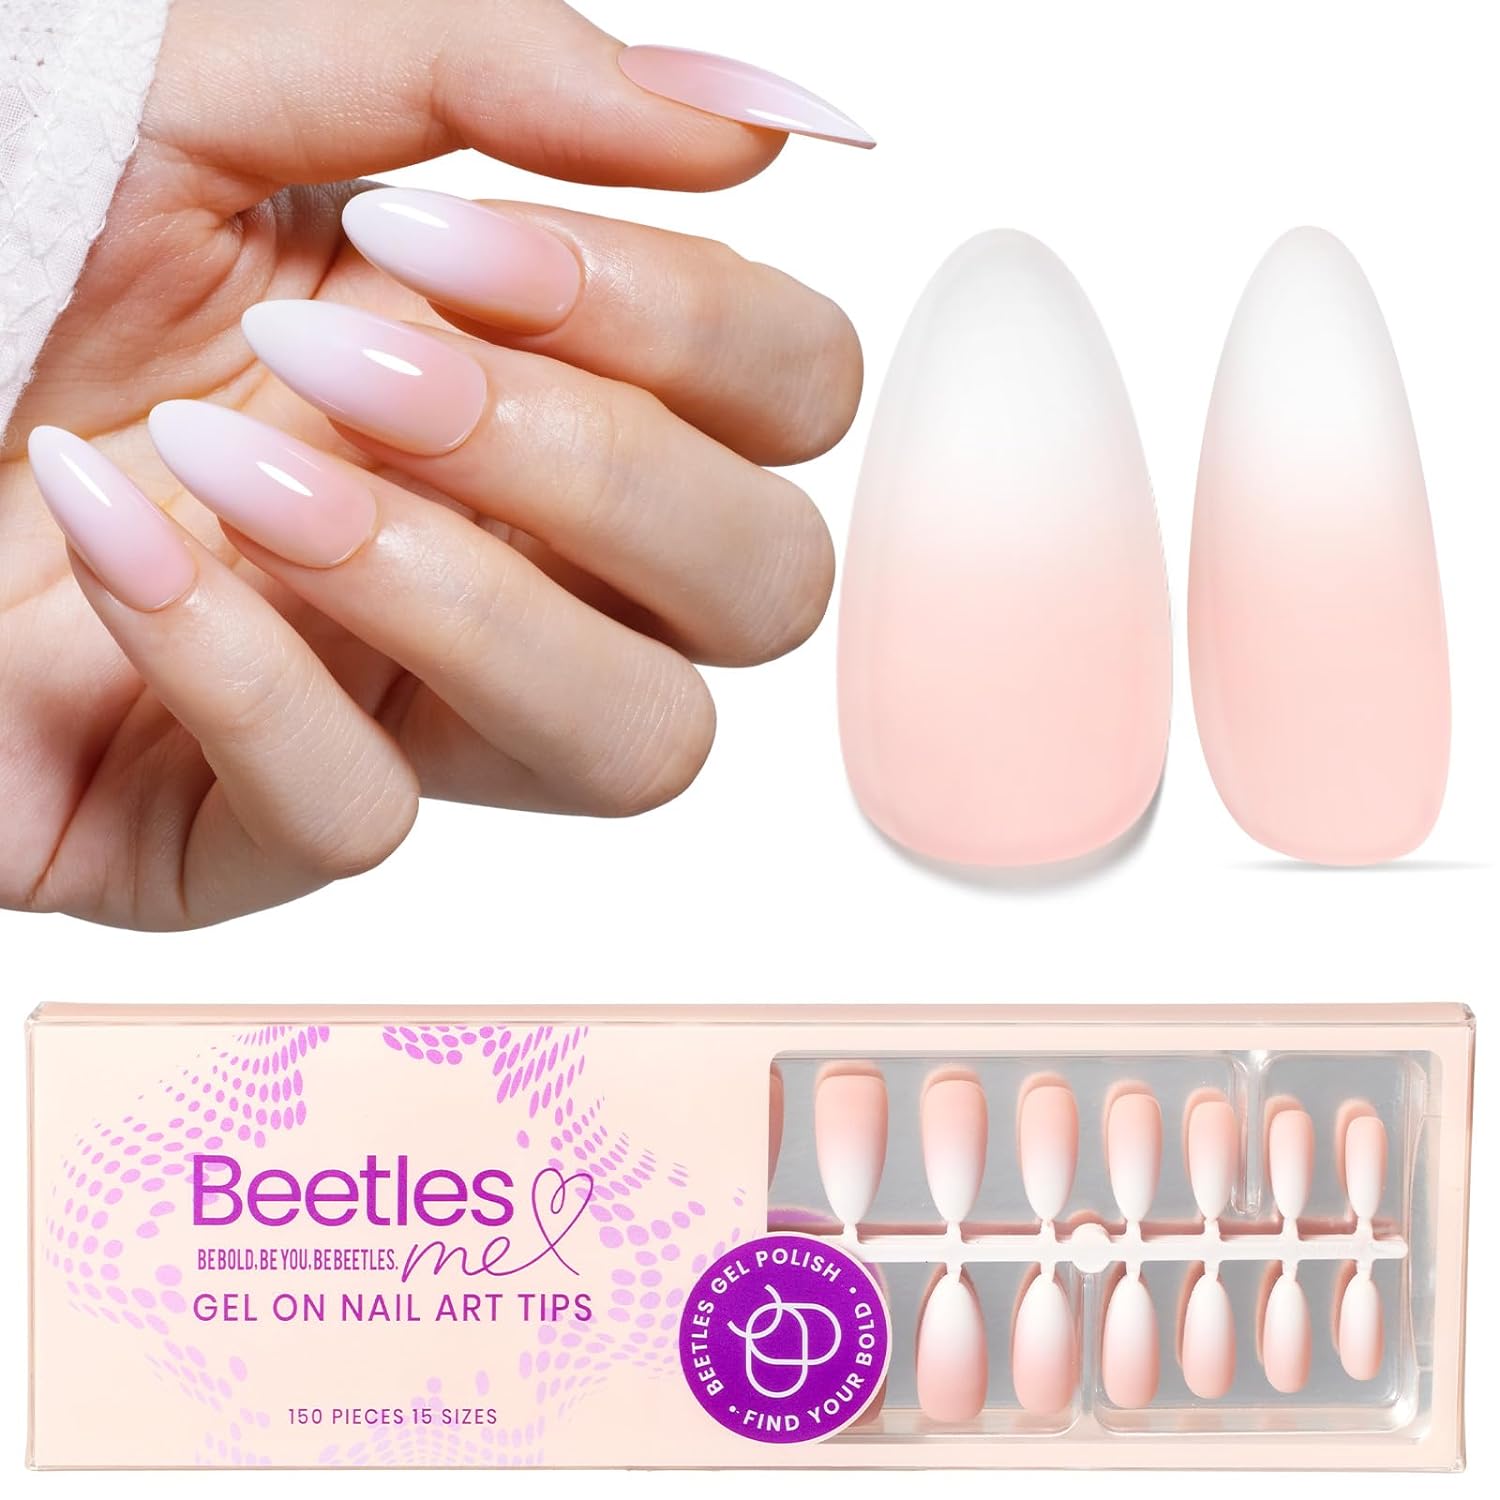 Beetles Almond Pre-French Tip Press on Nails in 150PCS 15 Sizes#005